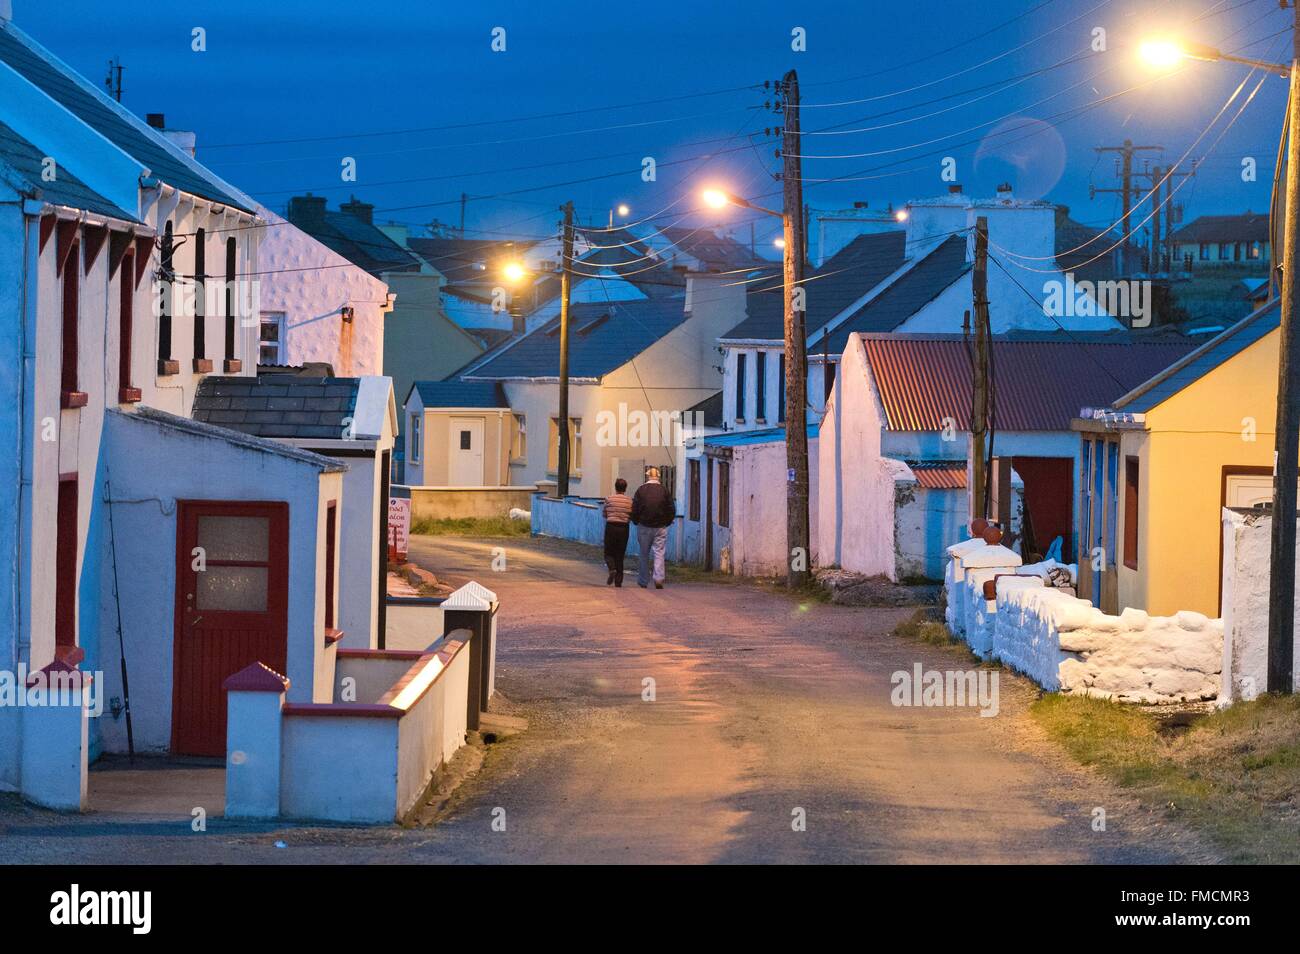 Ireland, County Donegal, Tory Island, a man and a woman walking in the village at twilight Stock Photo